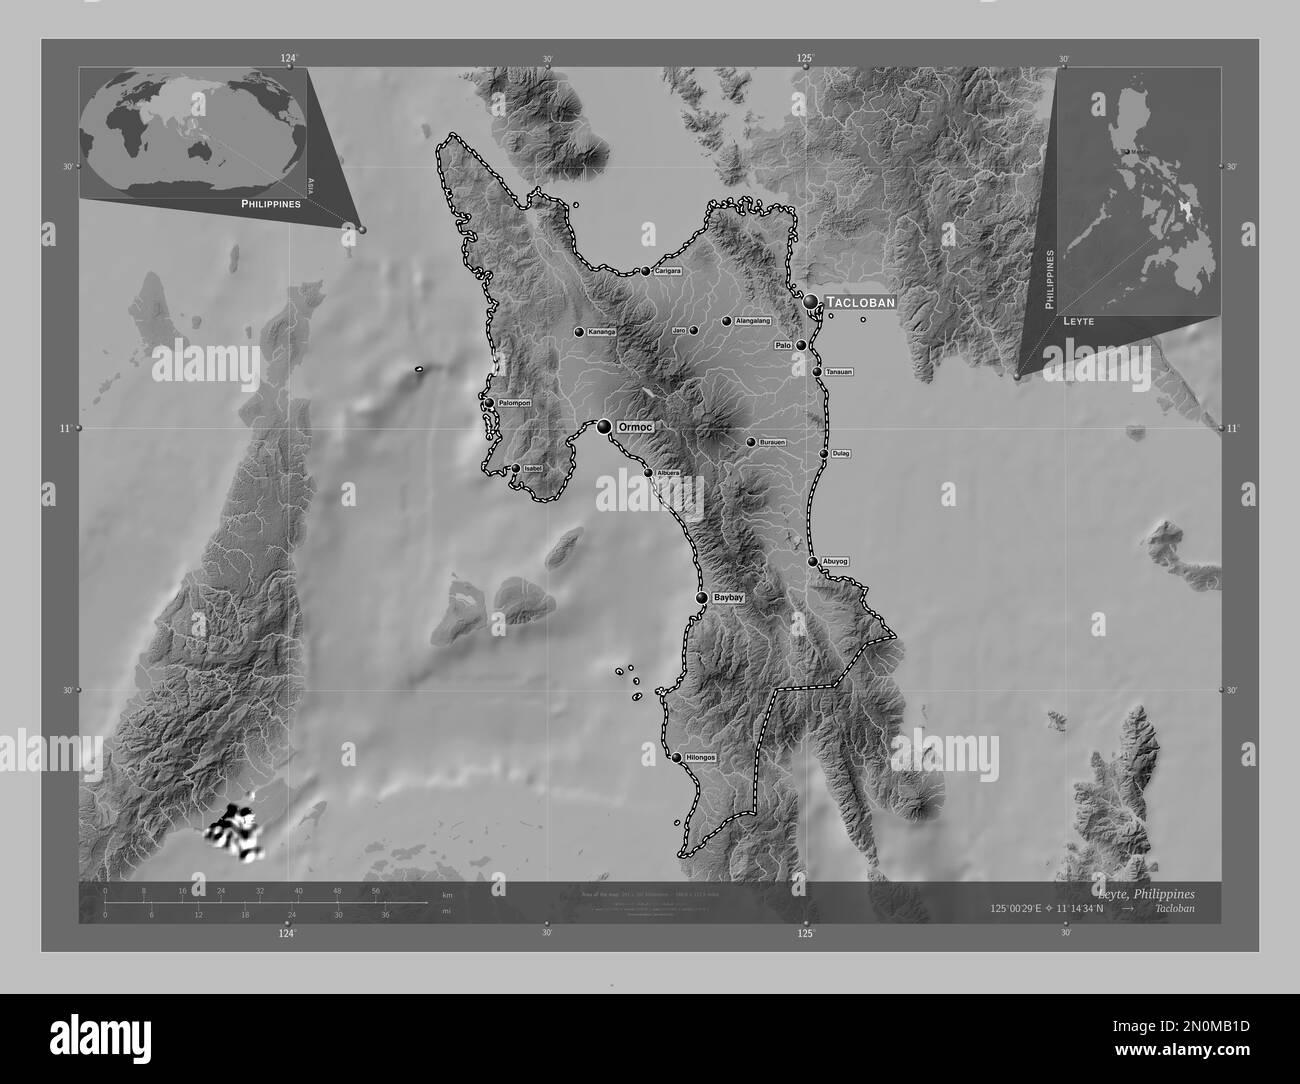 Leyte, province of Philippines. Grayscale elevation map with lakes and rivers. Locations and names of major cities of the region. Corner auxiliary loc Stock Photo